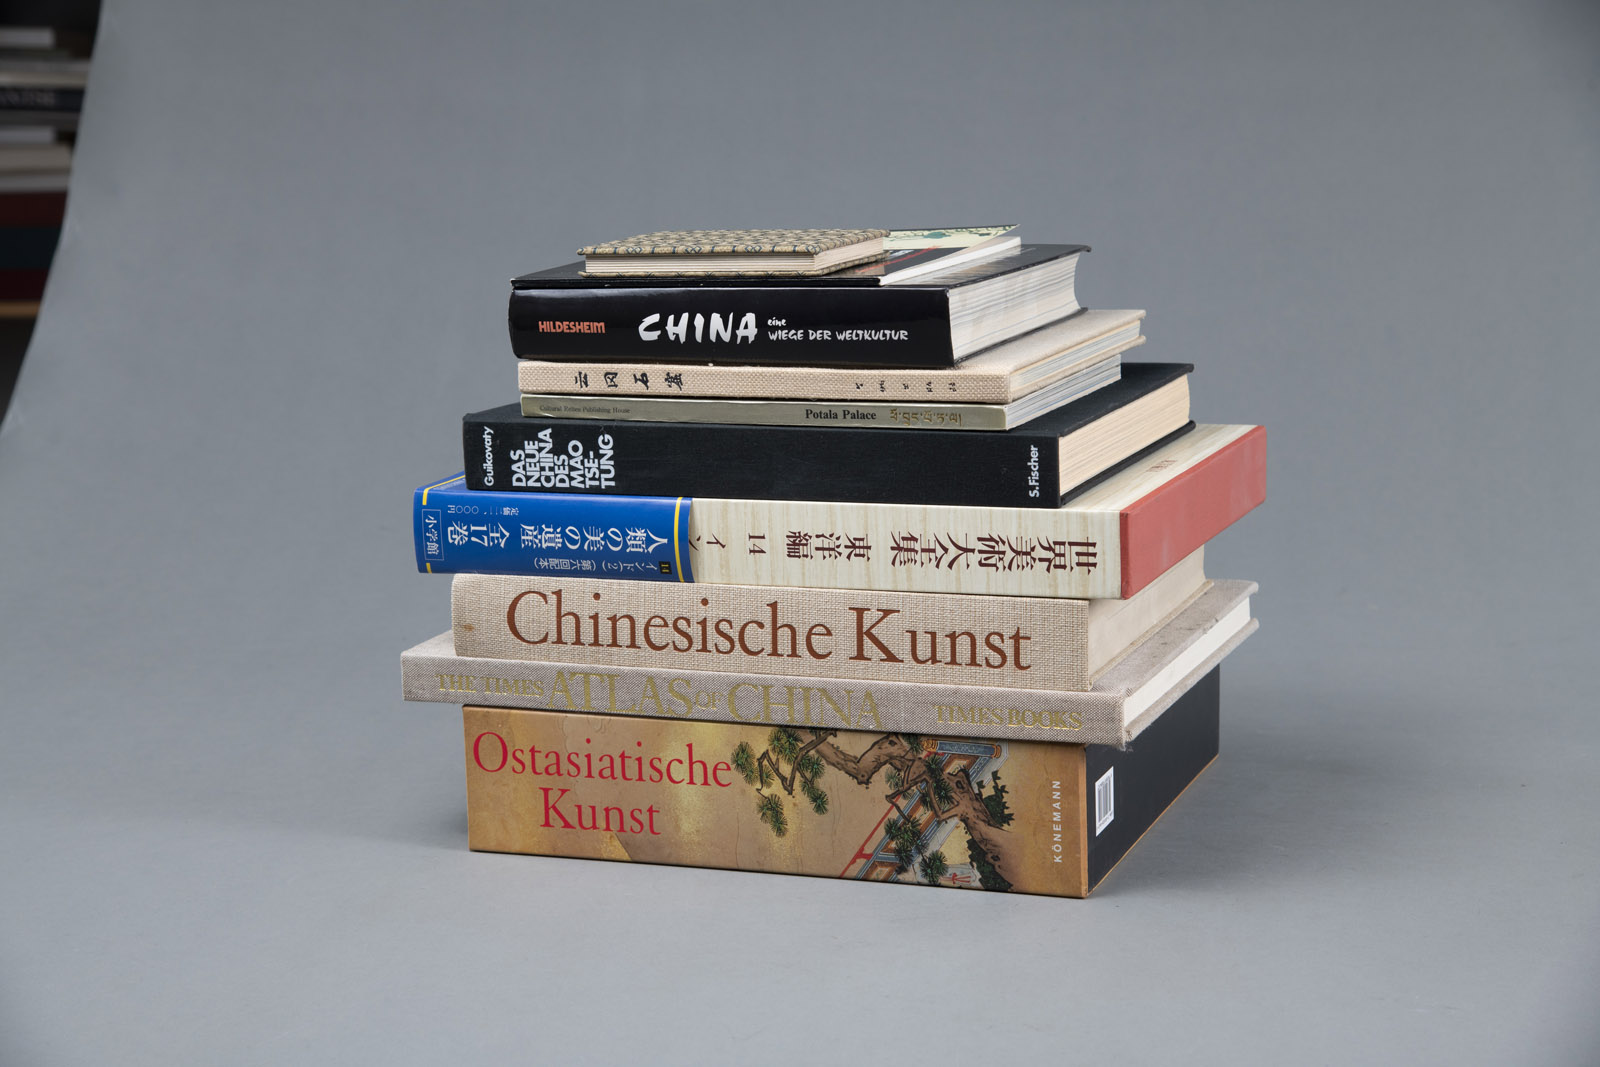 ART AND CULTURE IN CHINA, EAST ASIA, 10 VOLUMES, A.O. WERNER SPEISER, GABRIELE FAHR-BECKER